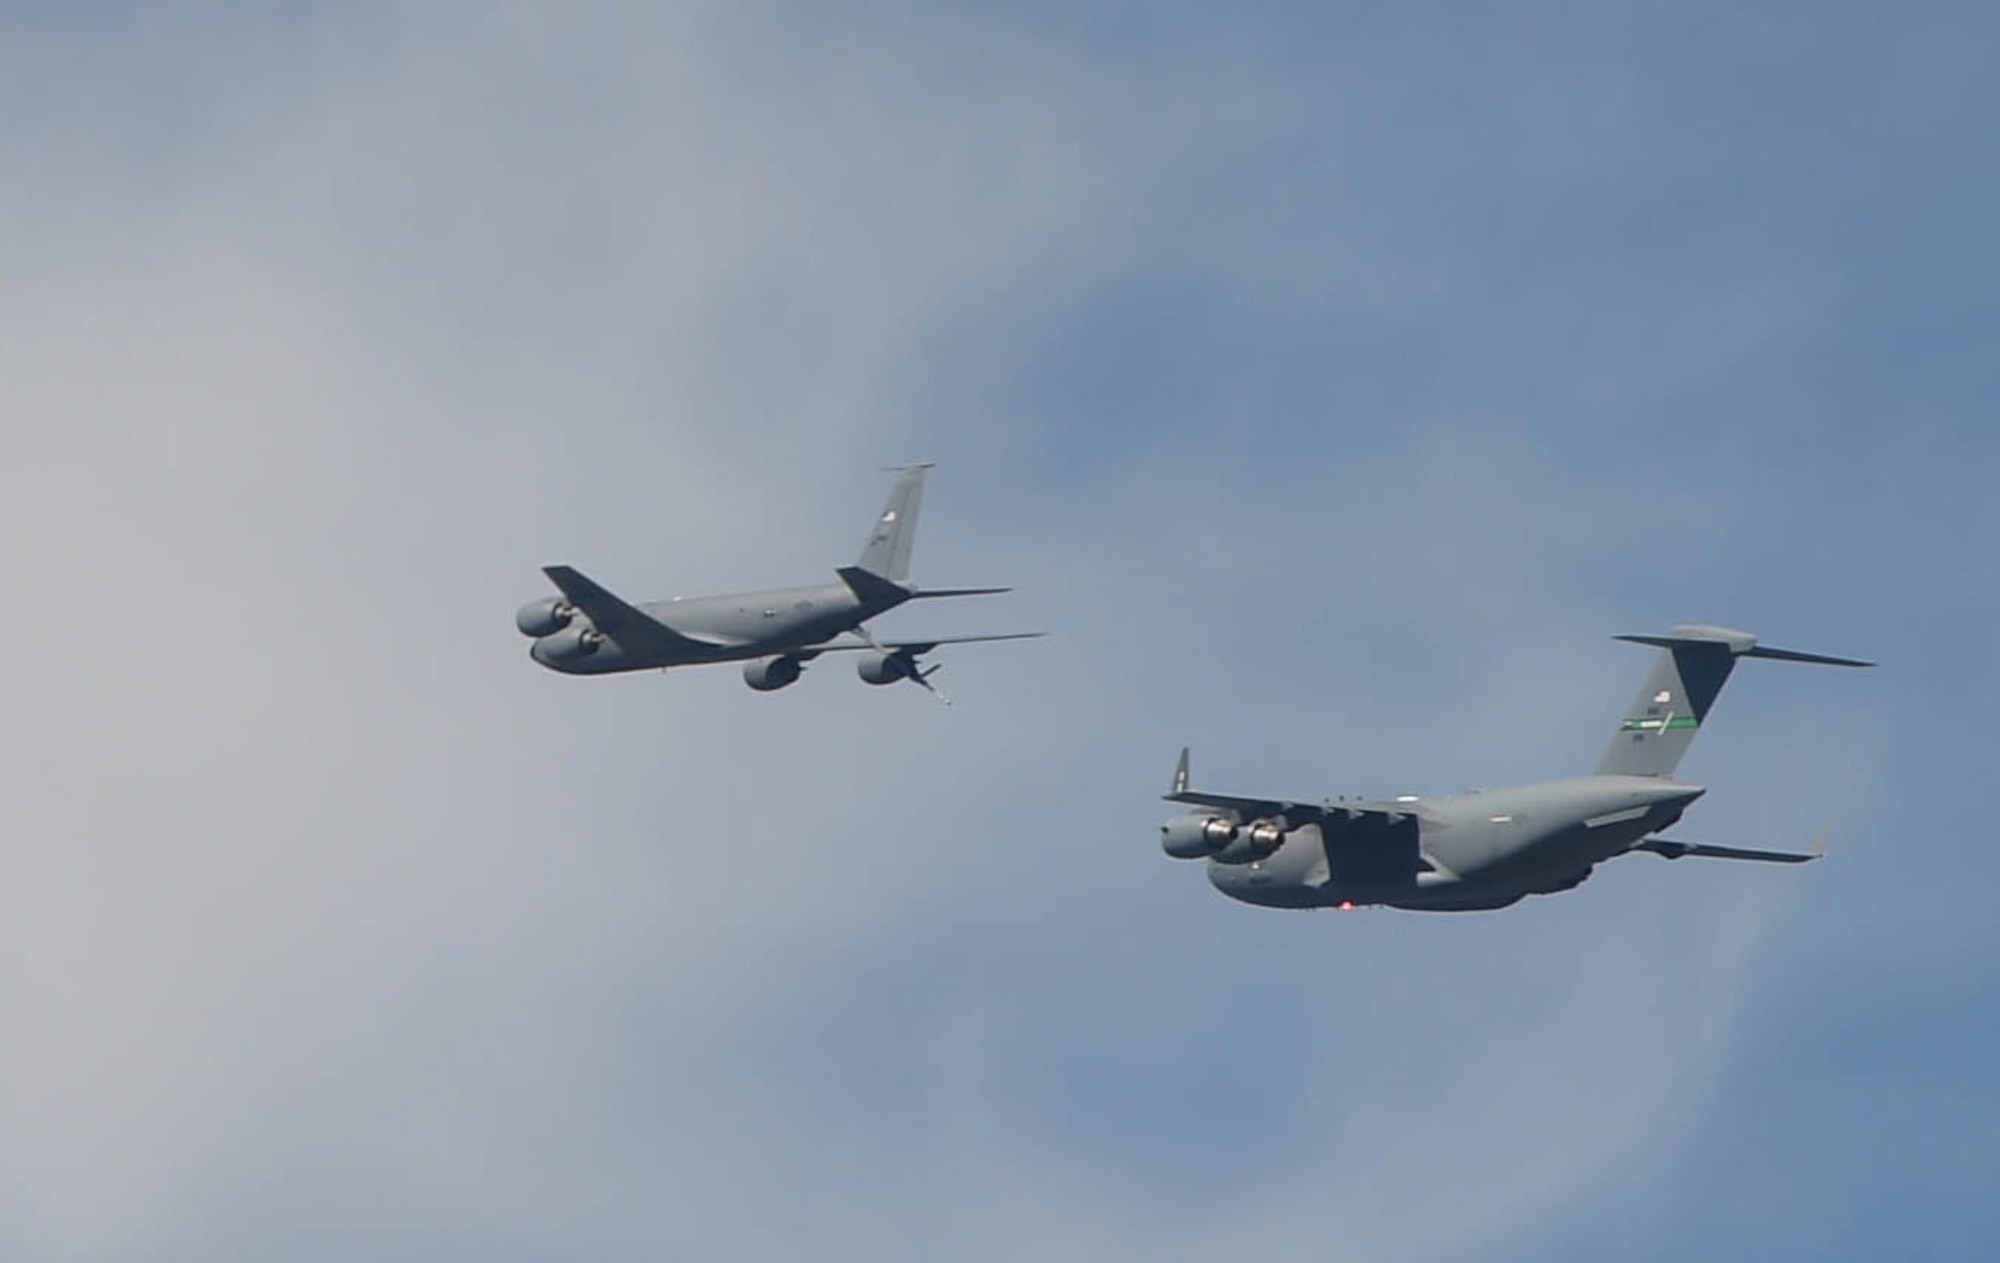 A C-17 Globemaster III, left, approaches a KC-135 Stratotanker for in-air refueling during Exercise rainier War near Moses Lake, Wash., June 6, 2018. Three KC-135 Stratotankers participated in Exercise Rainier War to provide in-air refueling to the multiple C-17s executing tactical combat missions. (U.S. Air Force photo by Senior Airman Tryphena Mayhugh)